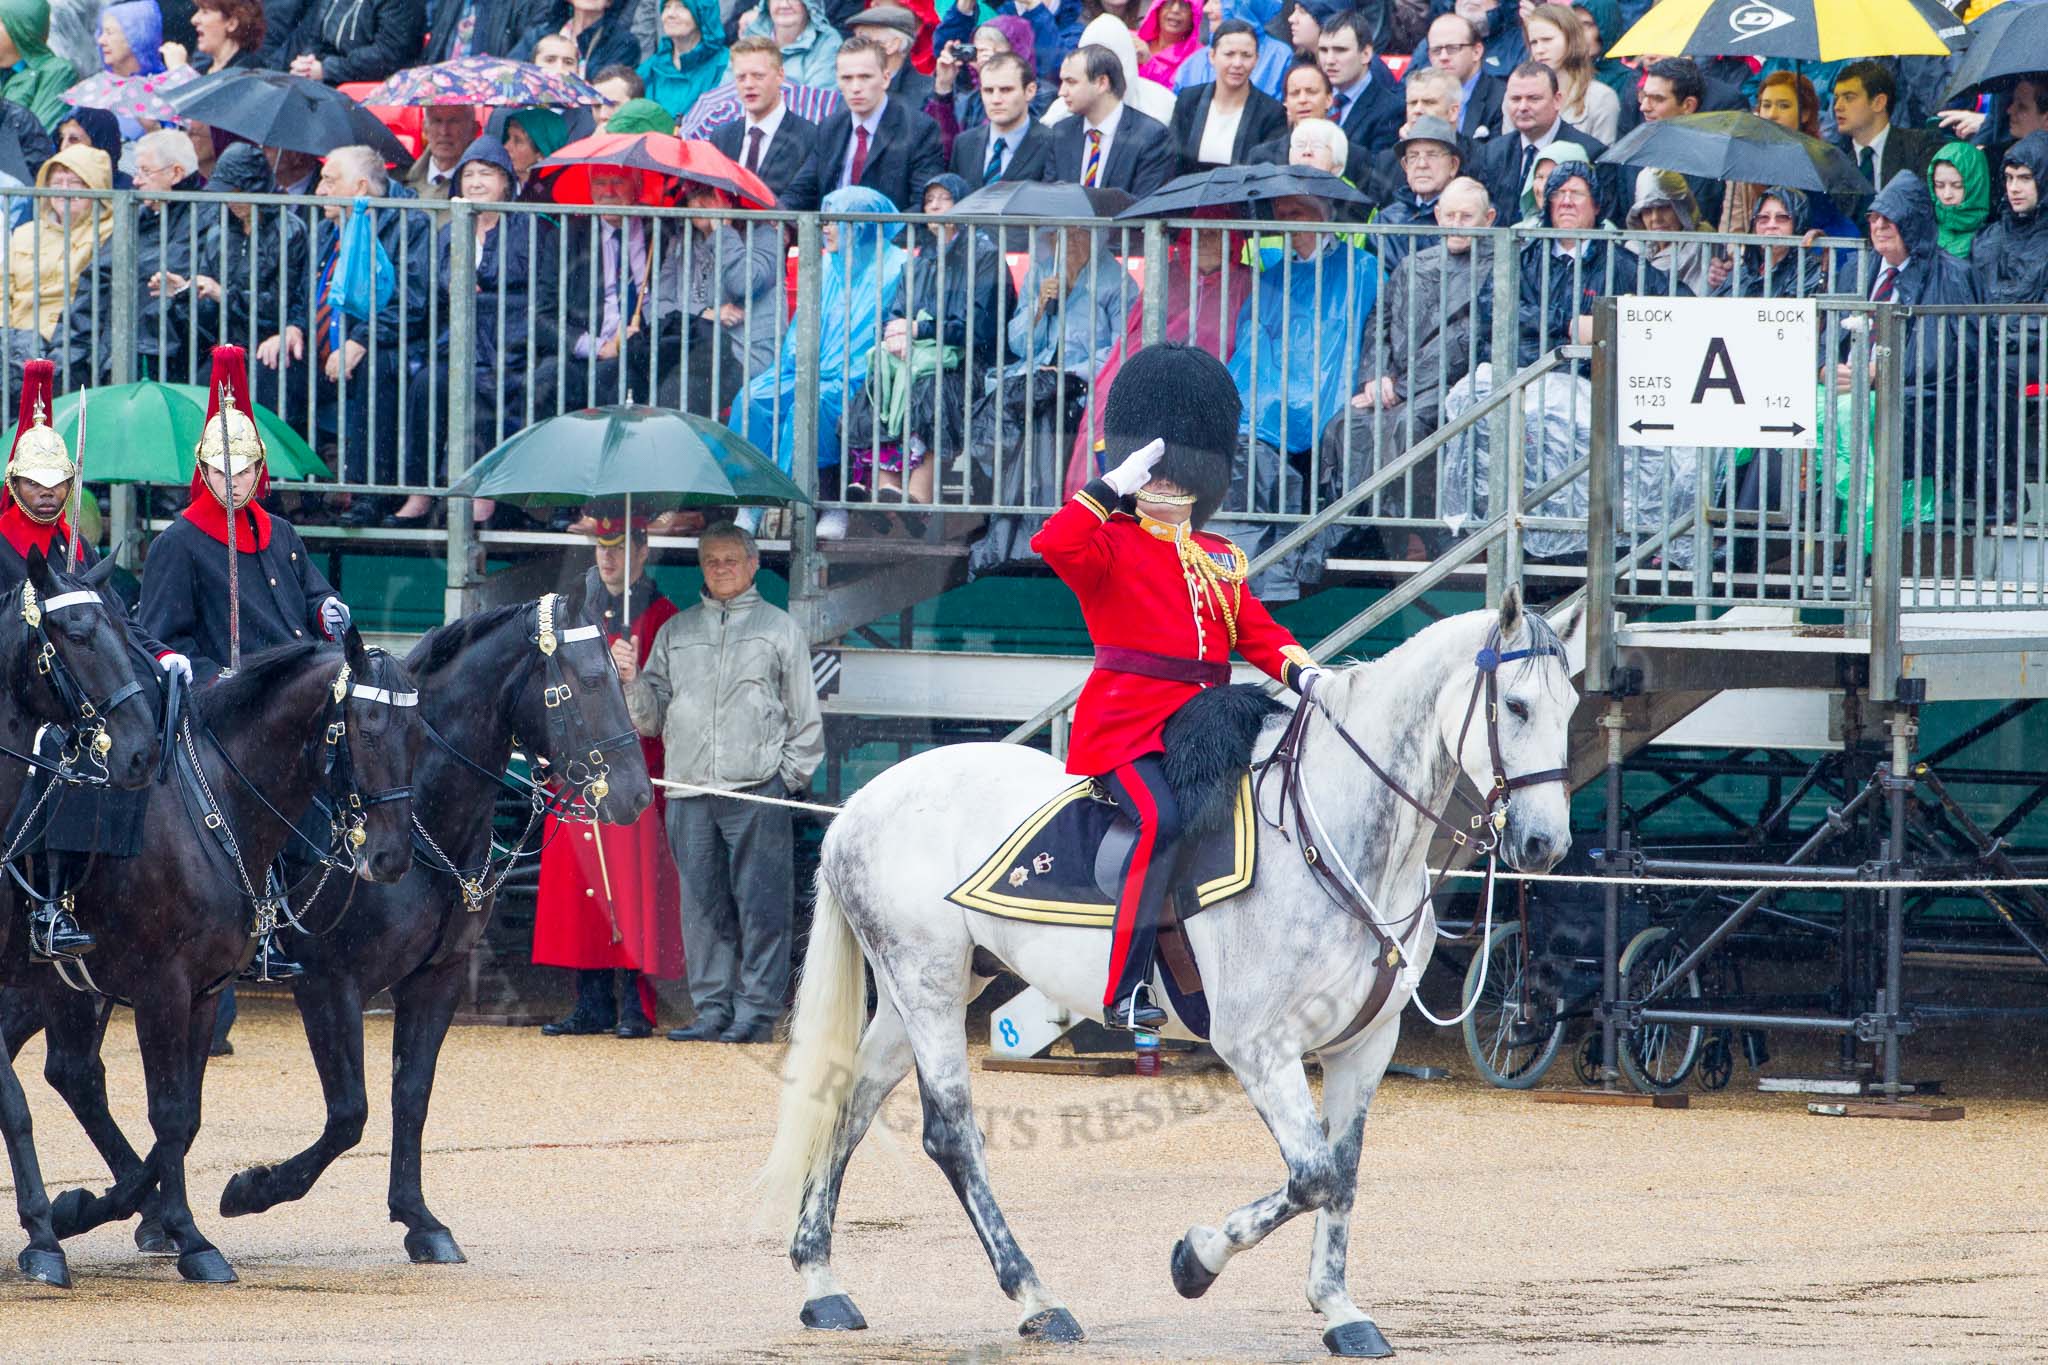 The Colonel's Review 2014.
Horse Guards Parade, Westminster,
London,

United Kingdom,
on 07 June 2014 at 10:56, image #230